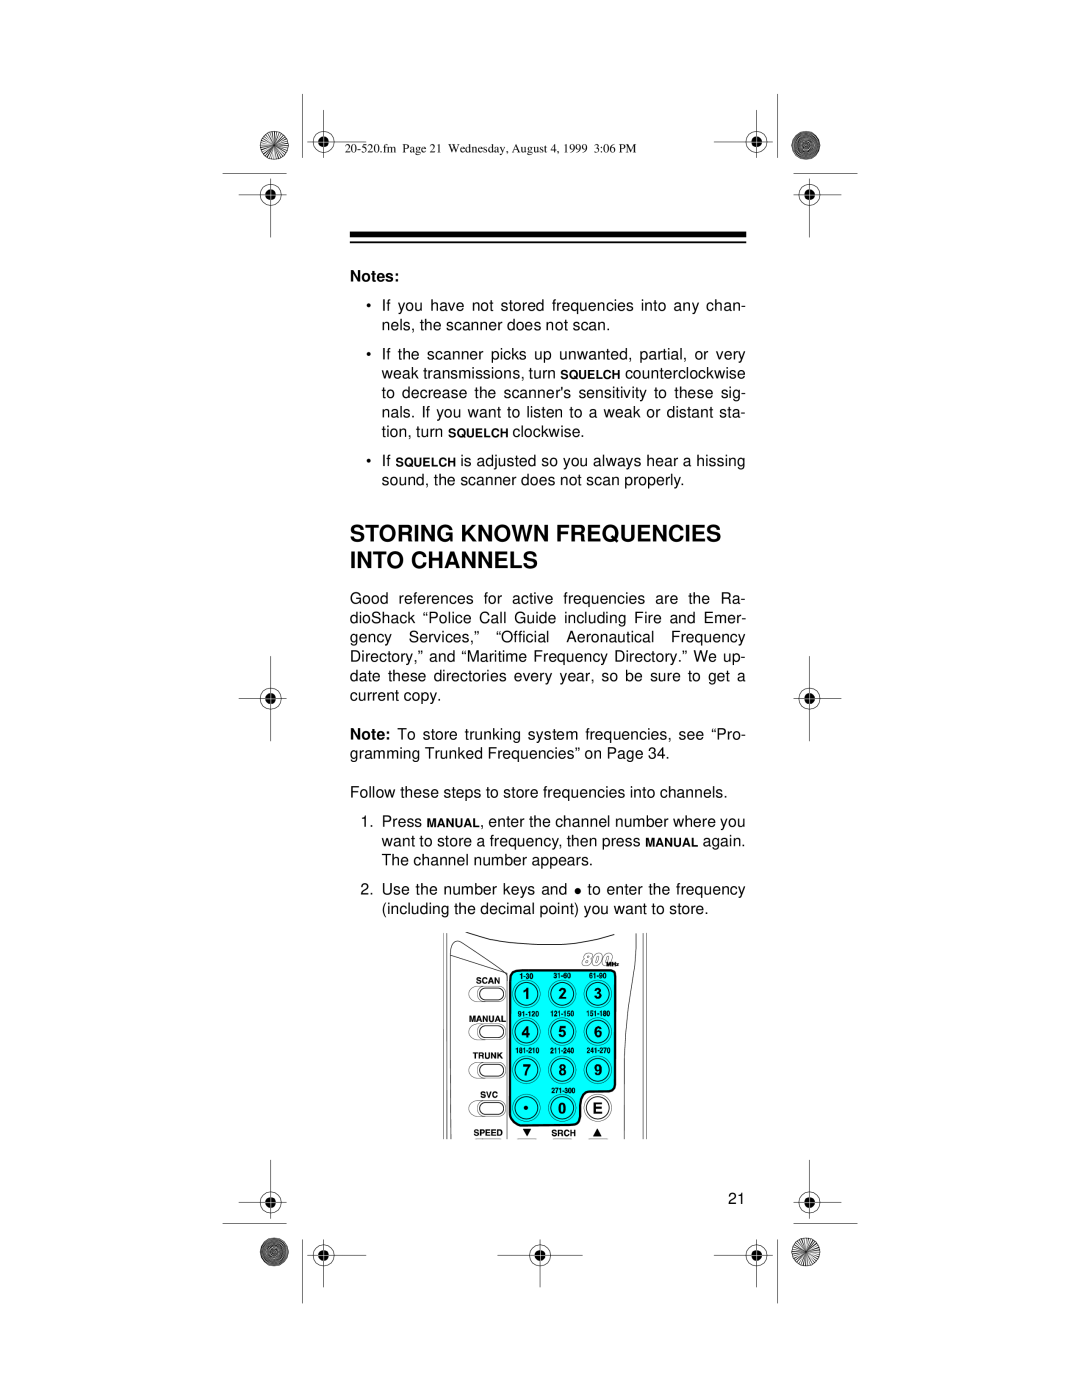 Radio Shack PRO-90 owner manual Storing Known Frequencies Into Channels 